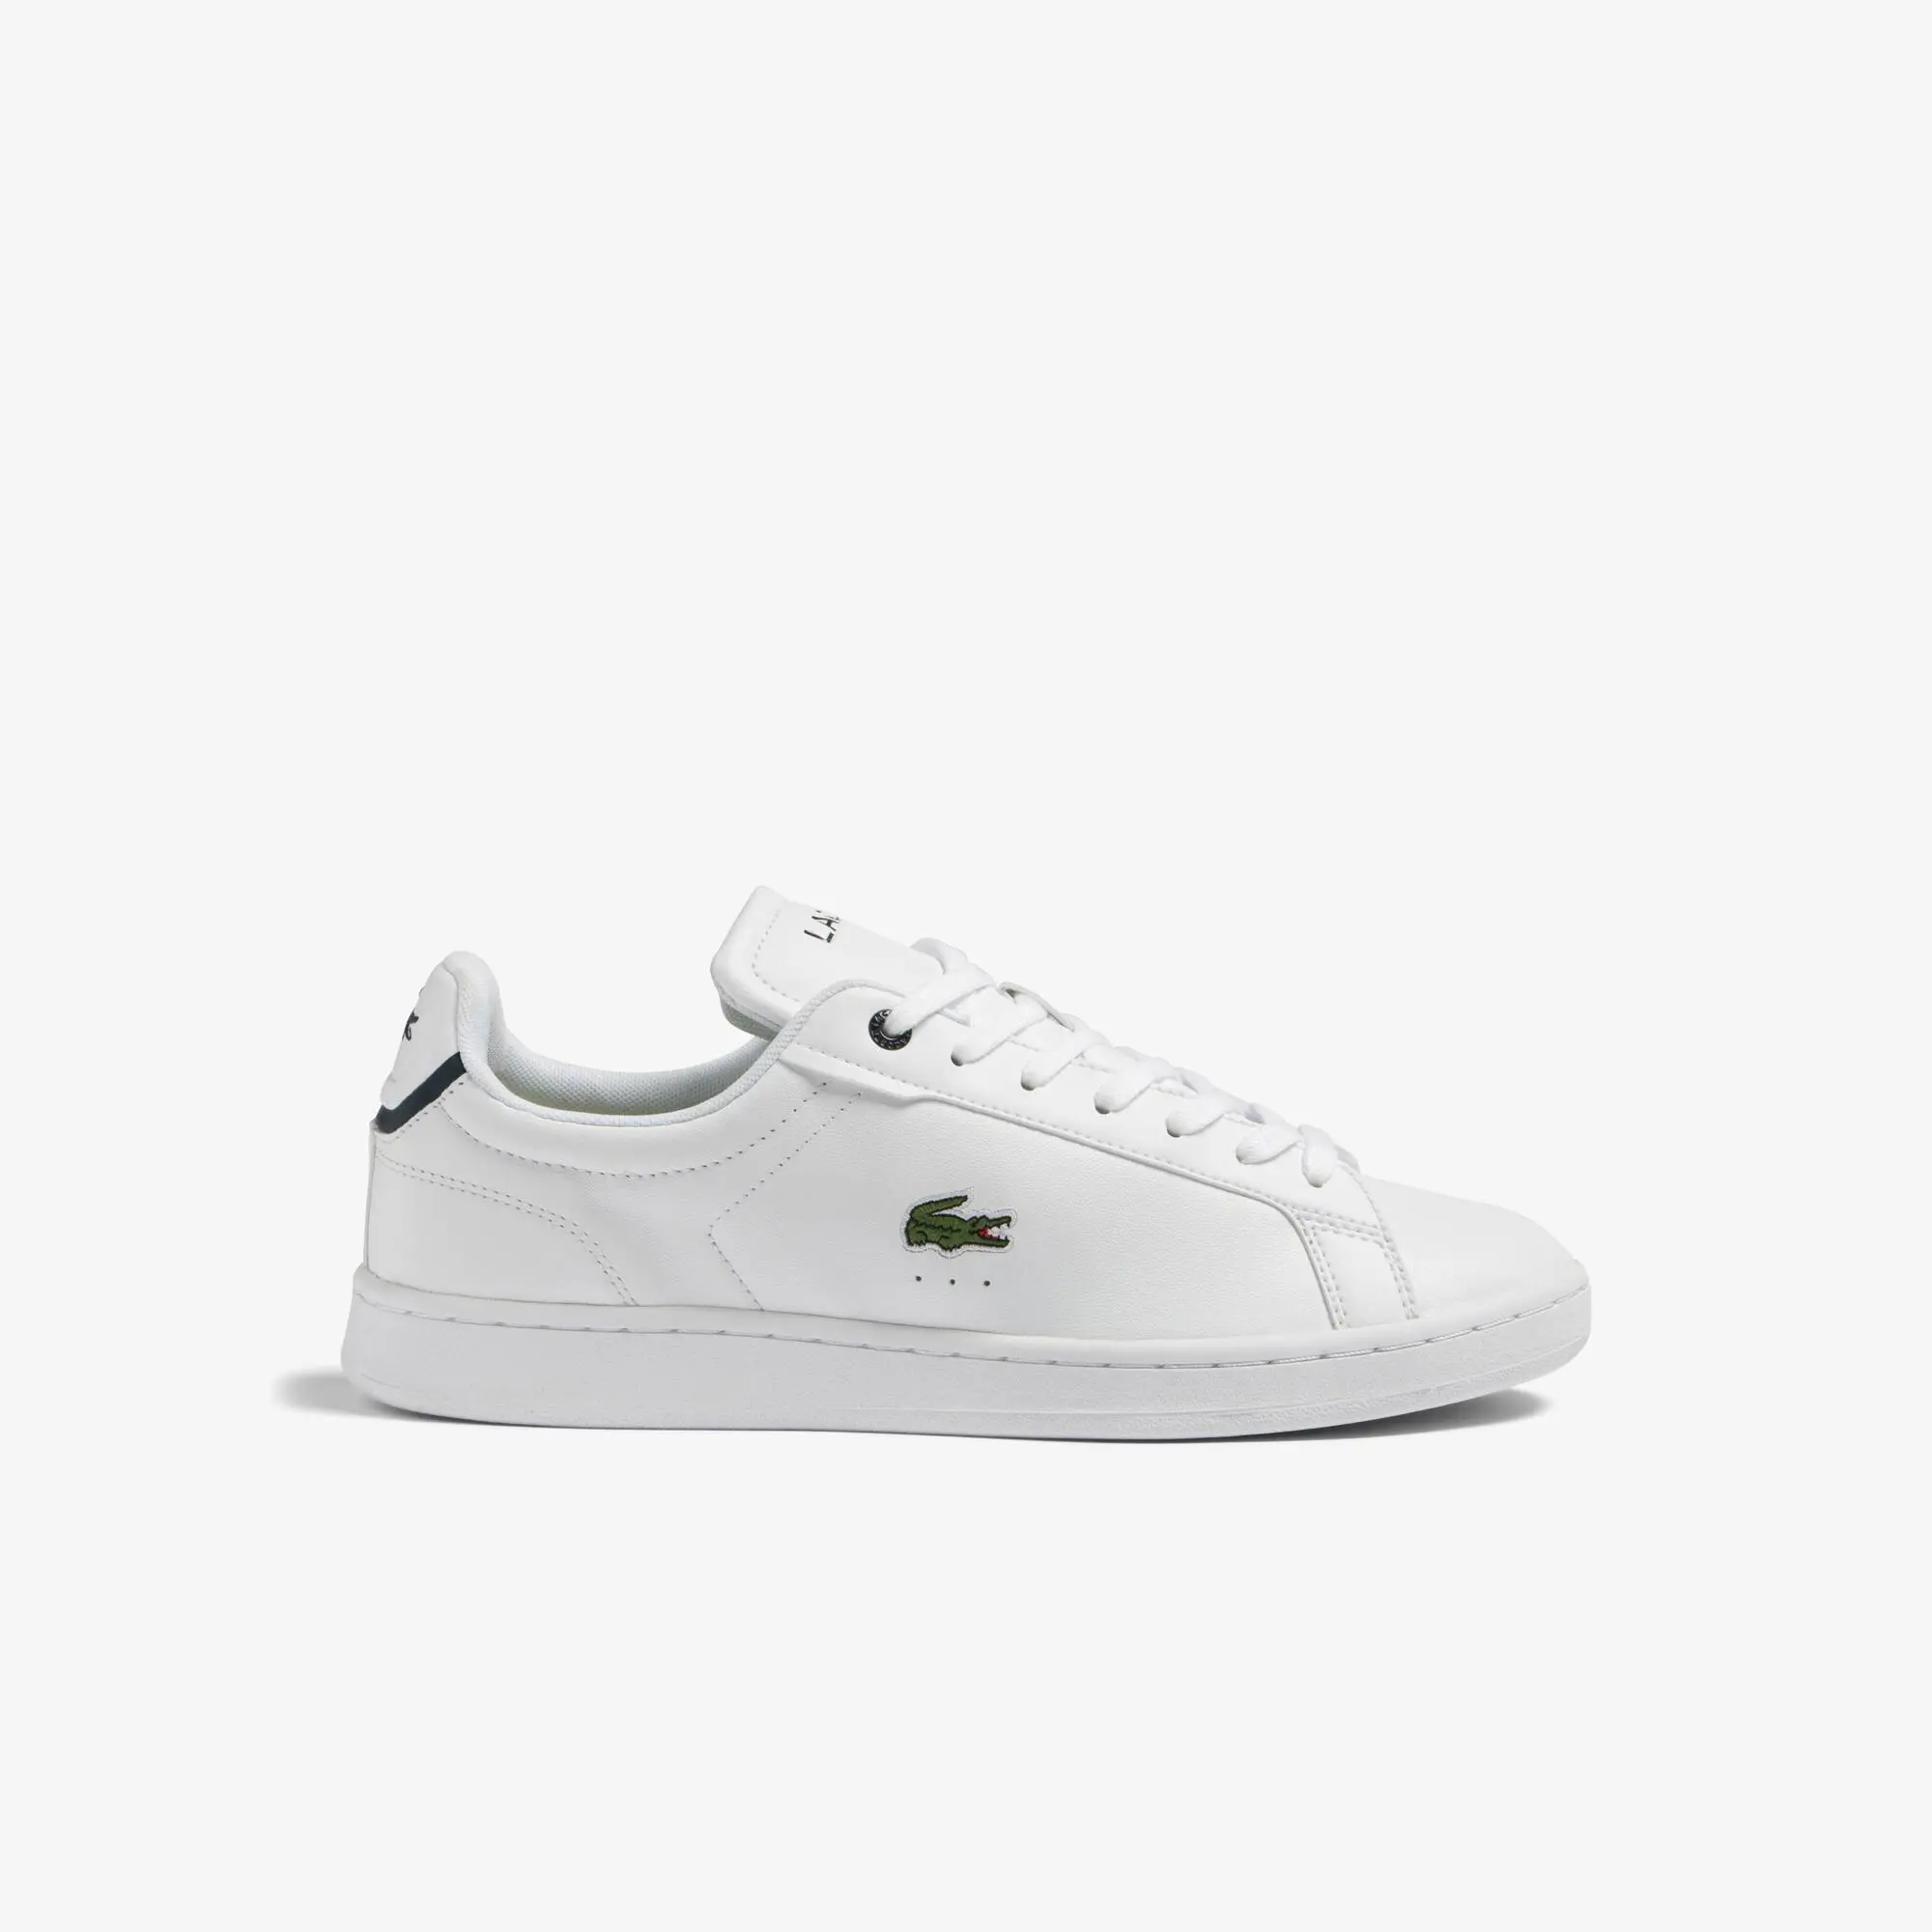 Lacoste Men's Lacoste Carnaby Pro BL Leather Tonal Trainers. 1